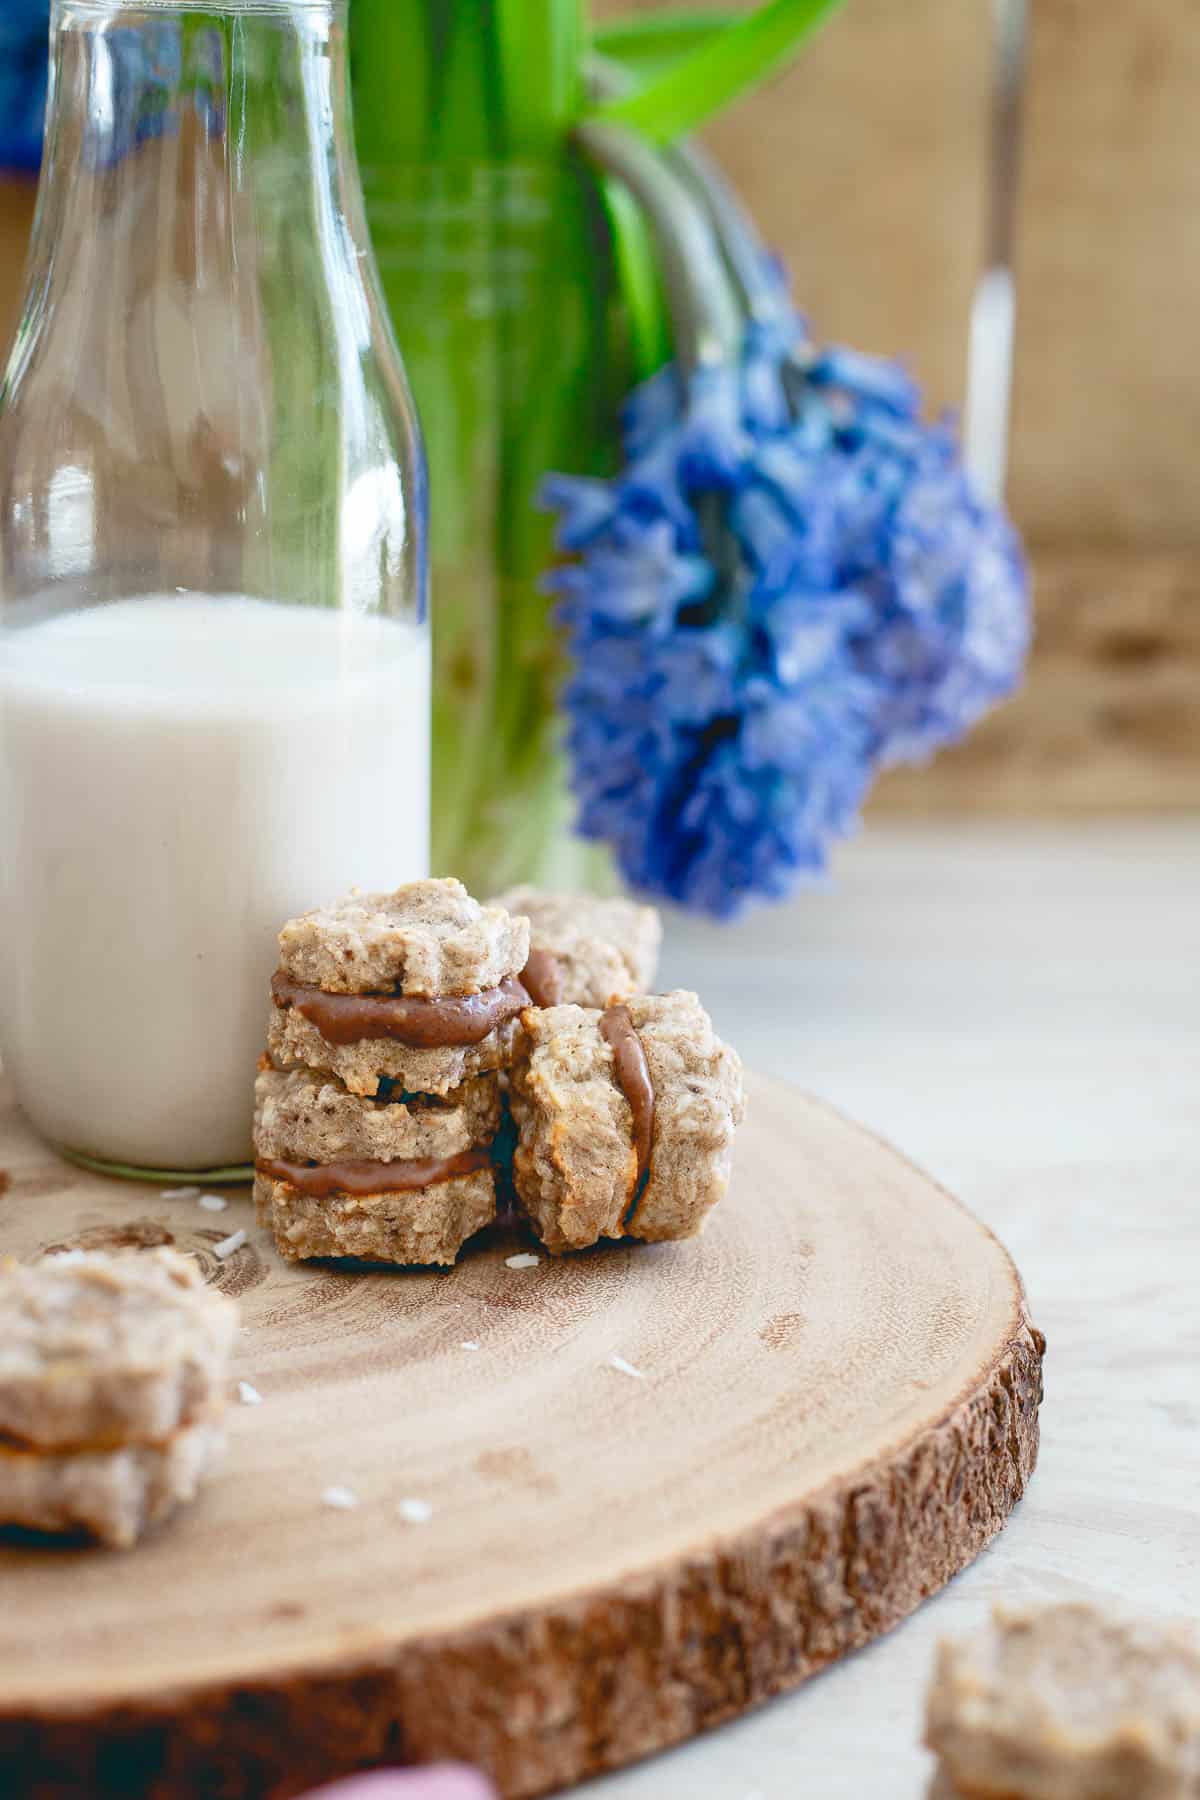 These banana macaroon sandwich cookies are filled with a decadent chocolate hazelnut spread and with just 5 ingredients, they're so simple to make!